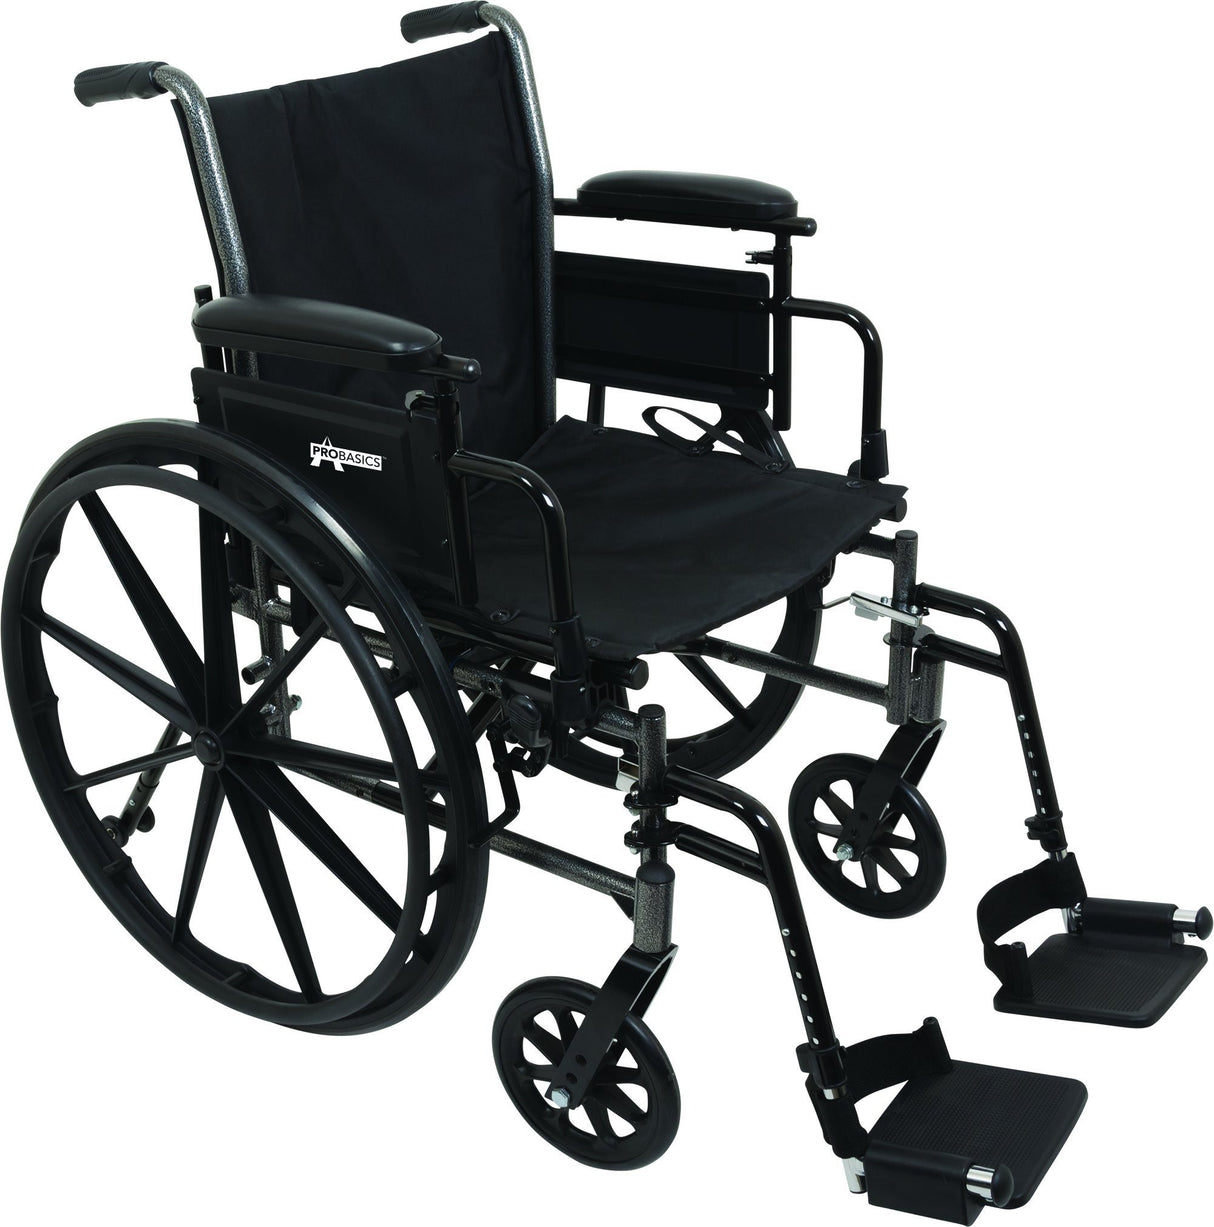 Image of ProBasics K3 Lightweight Wheelchair with 16" x 16" Seat, Flip-Up Height Adj Desk Arms, Swing-Away Footrests